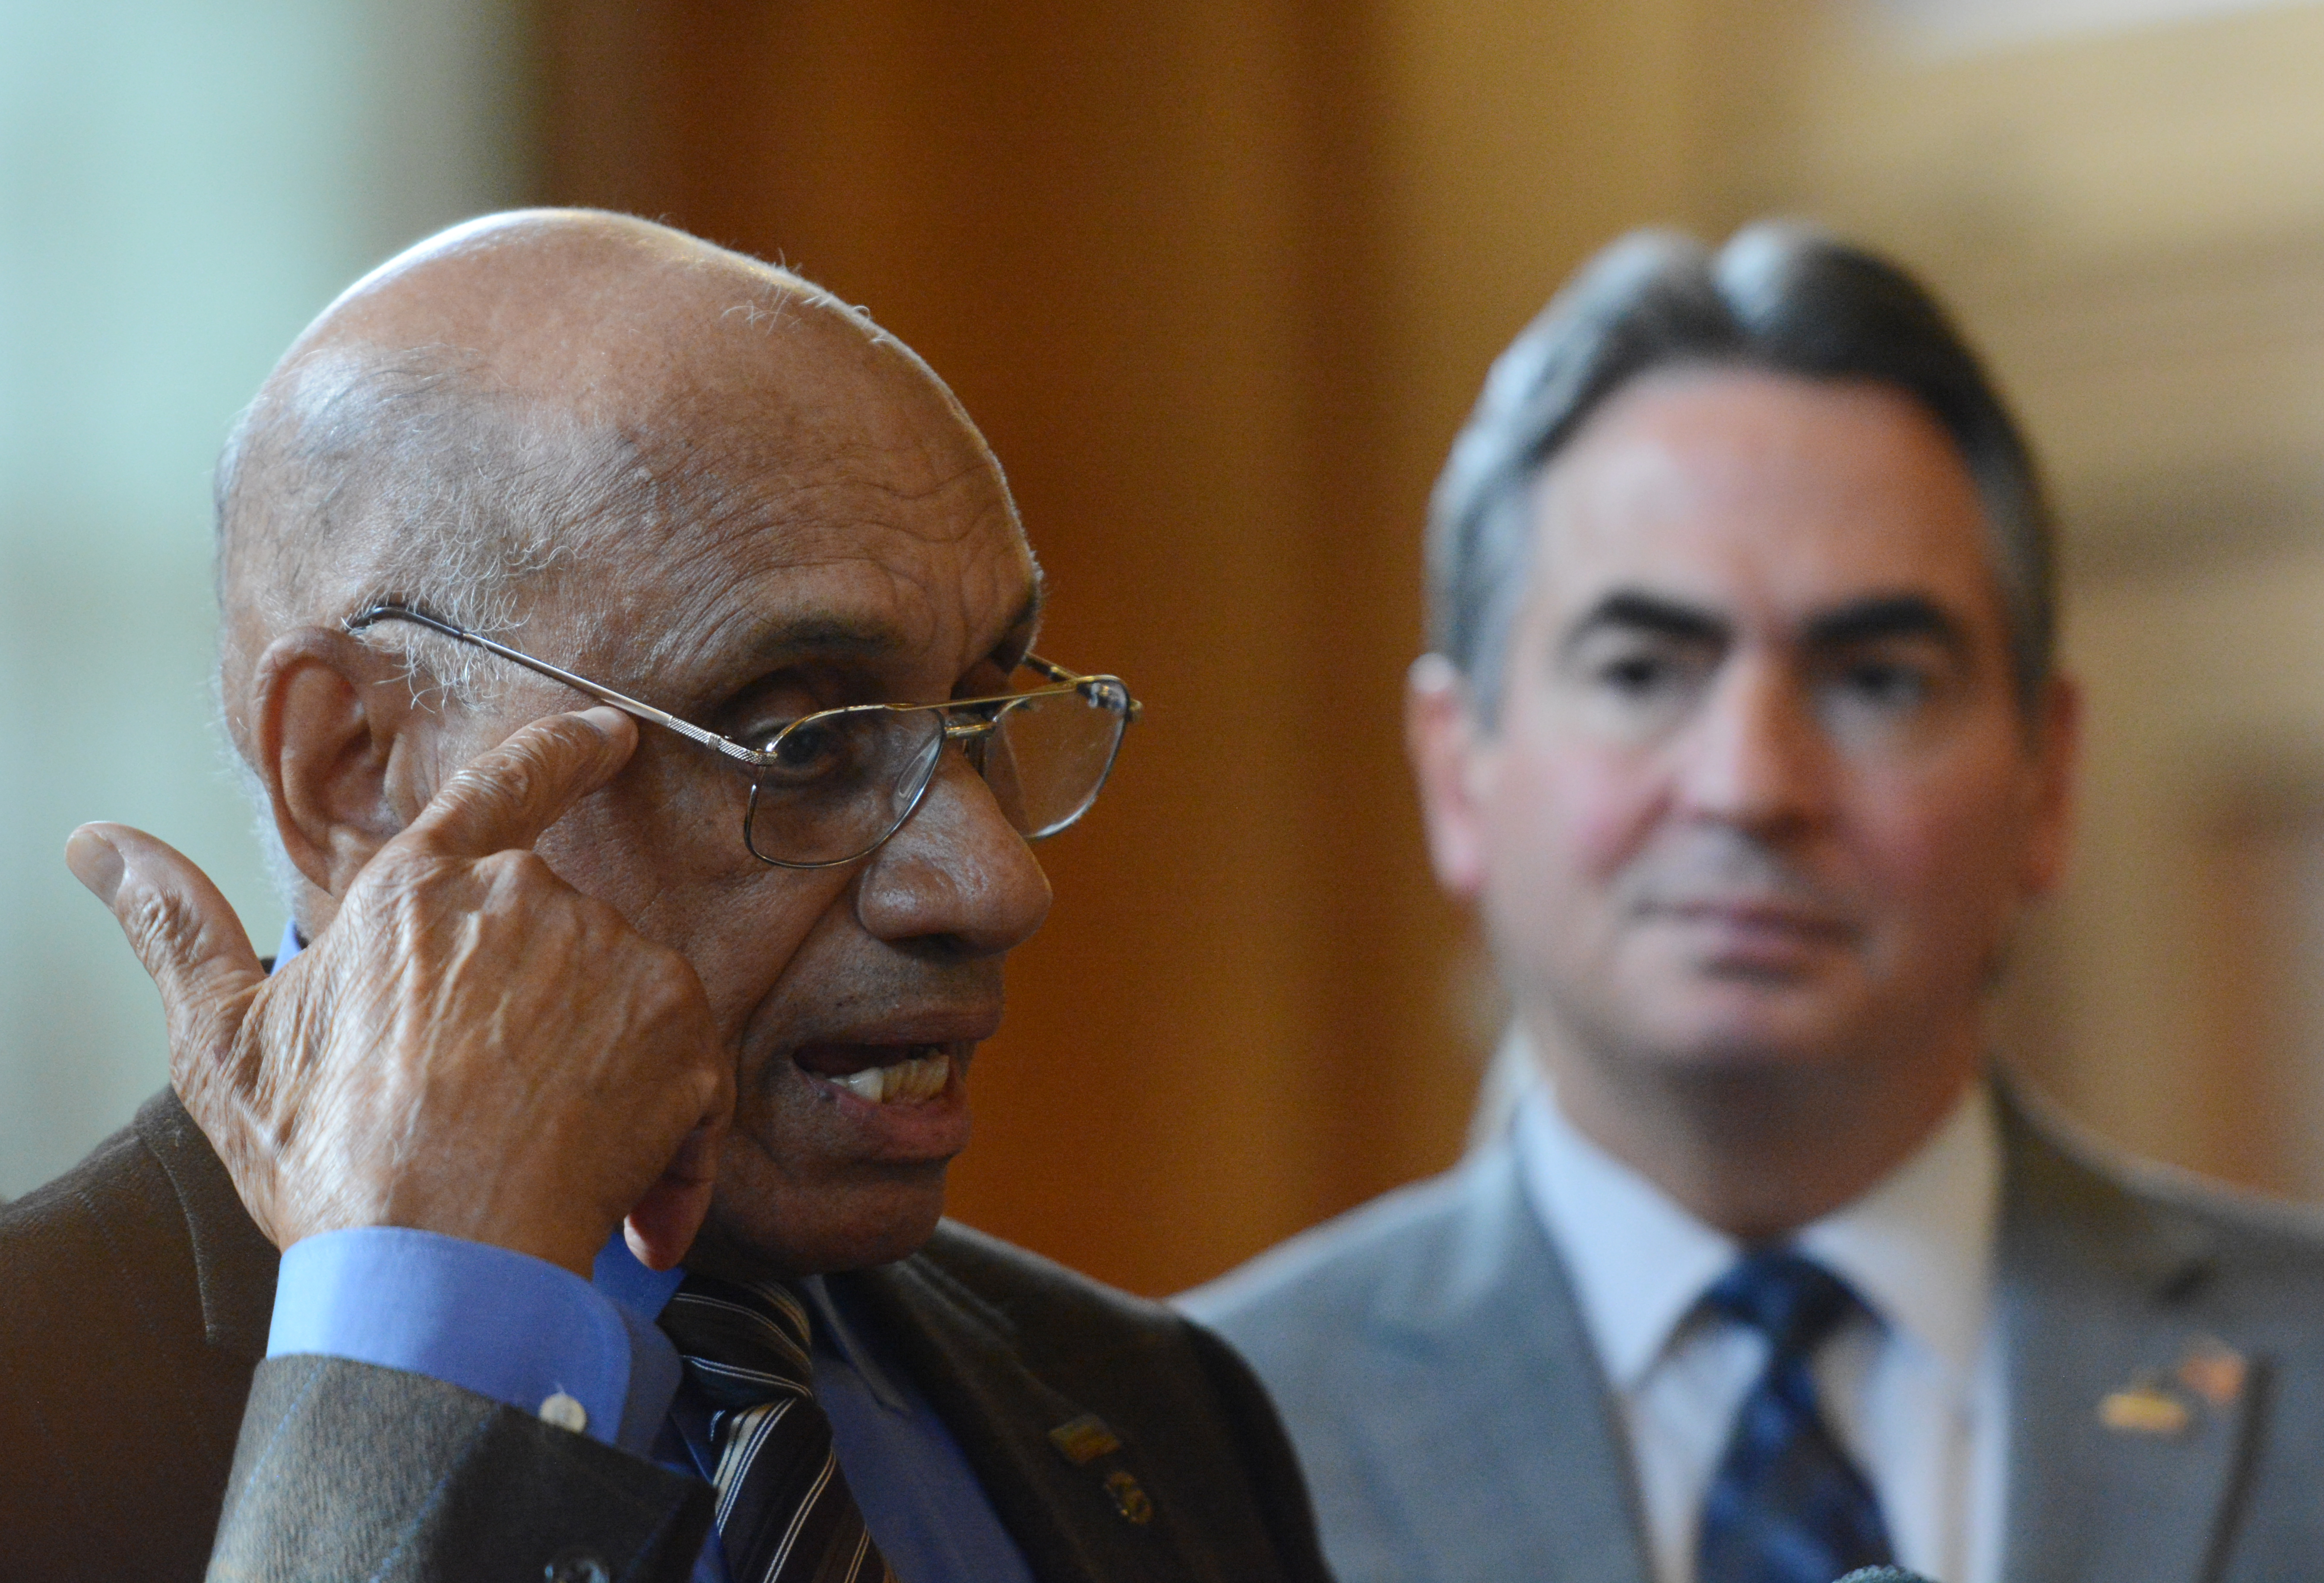 Breaking NHL color barrier: Boston Bruins to retire Willie O'Ree's